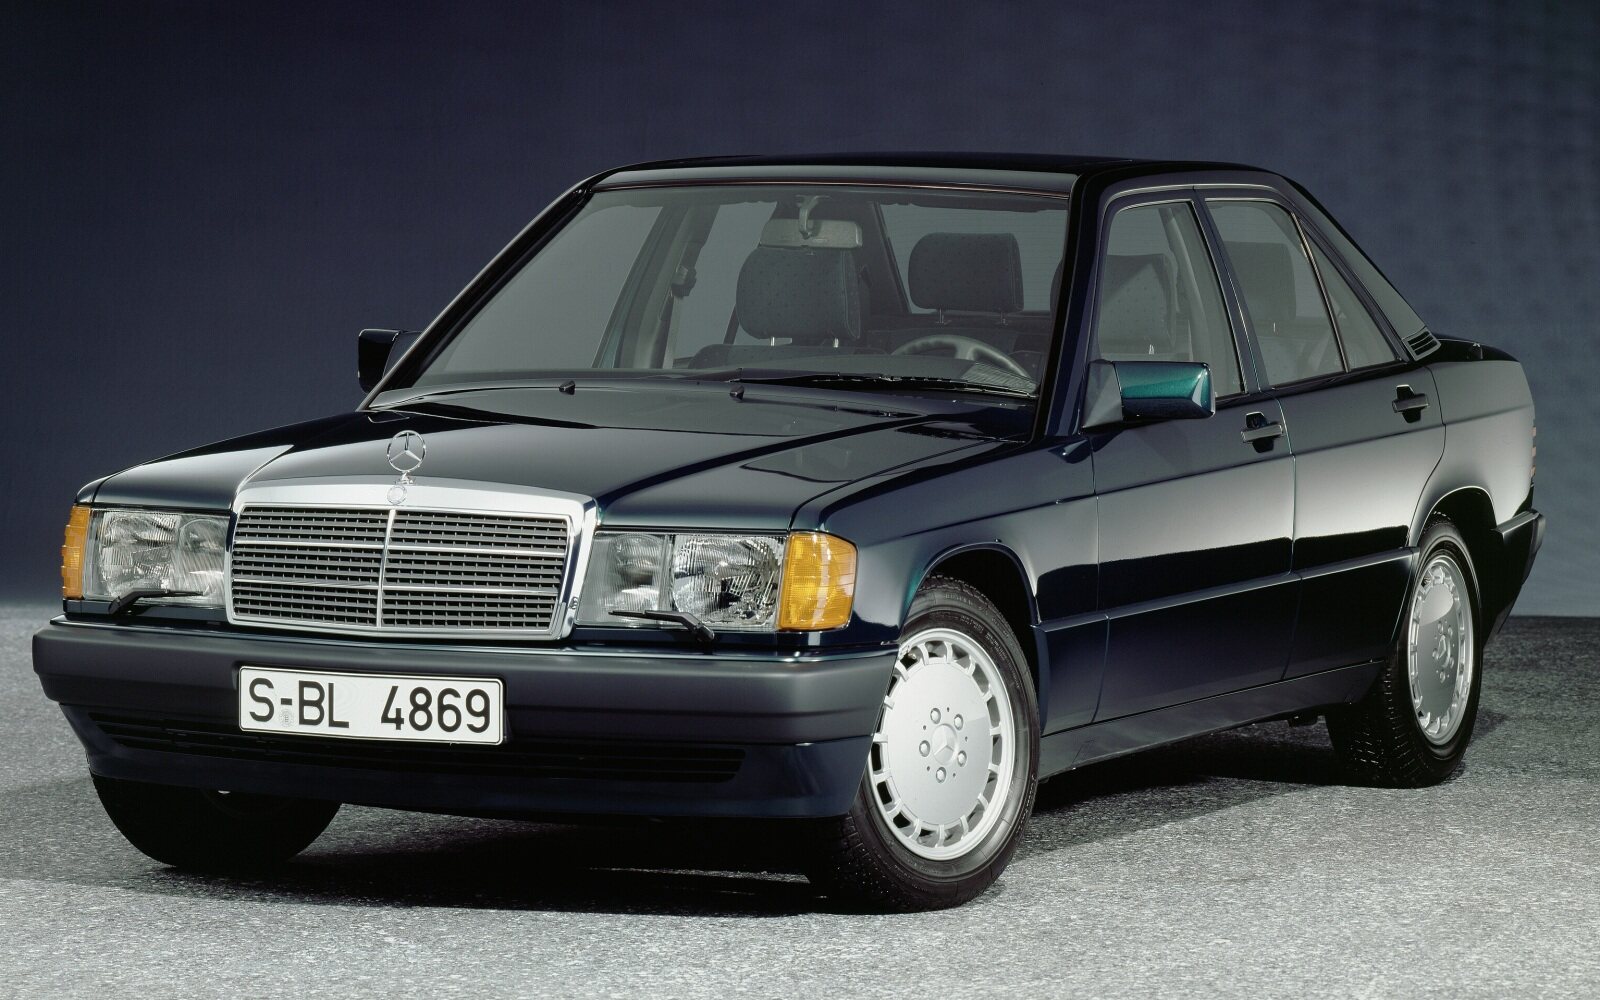 PKW4120000000 C-Class Saloons and predecessors